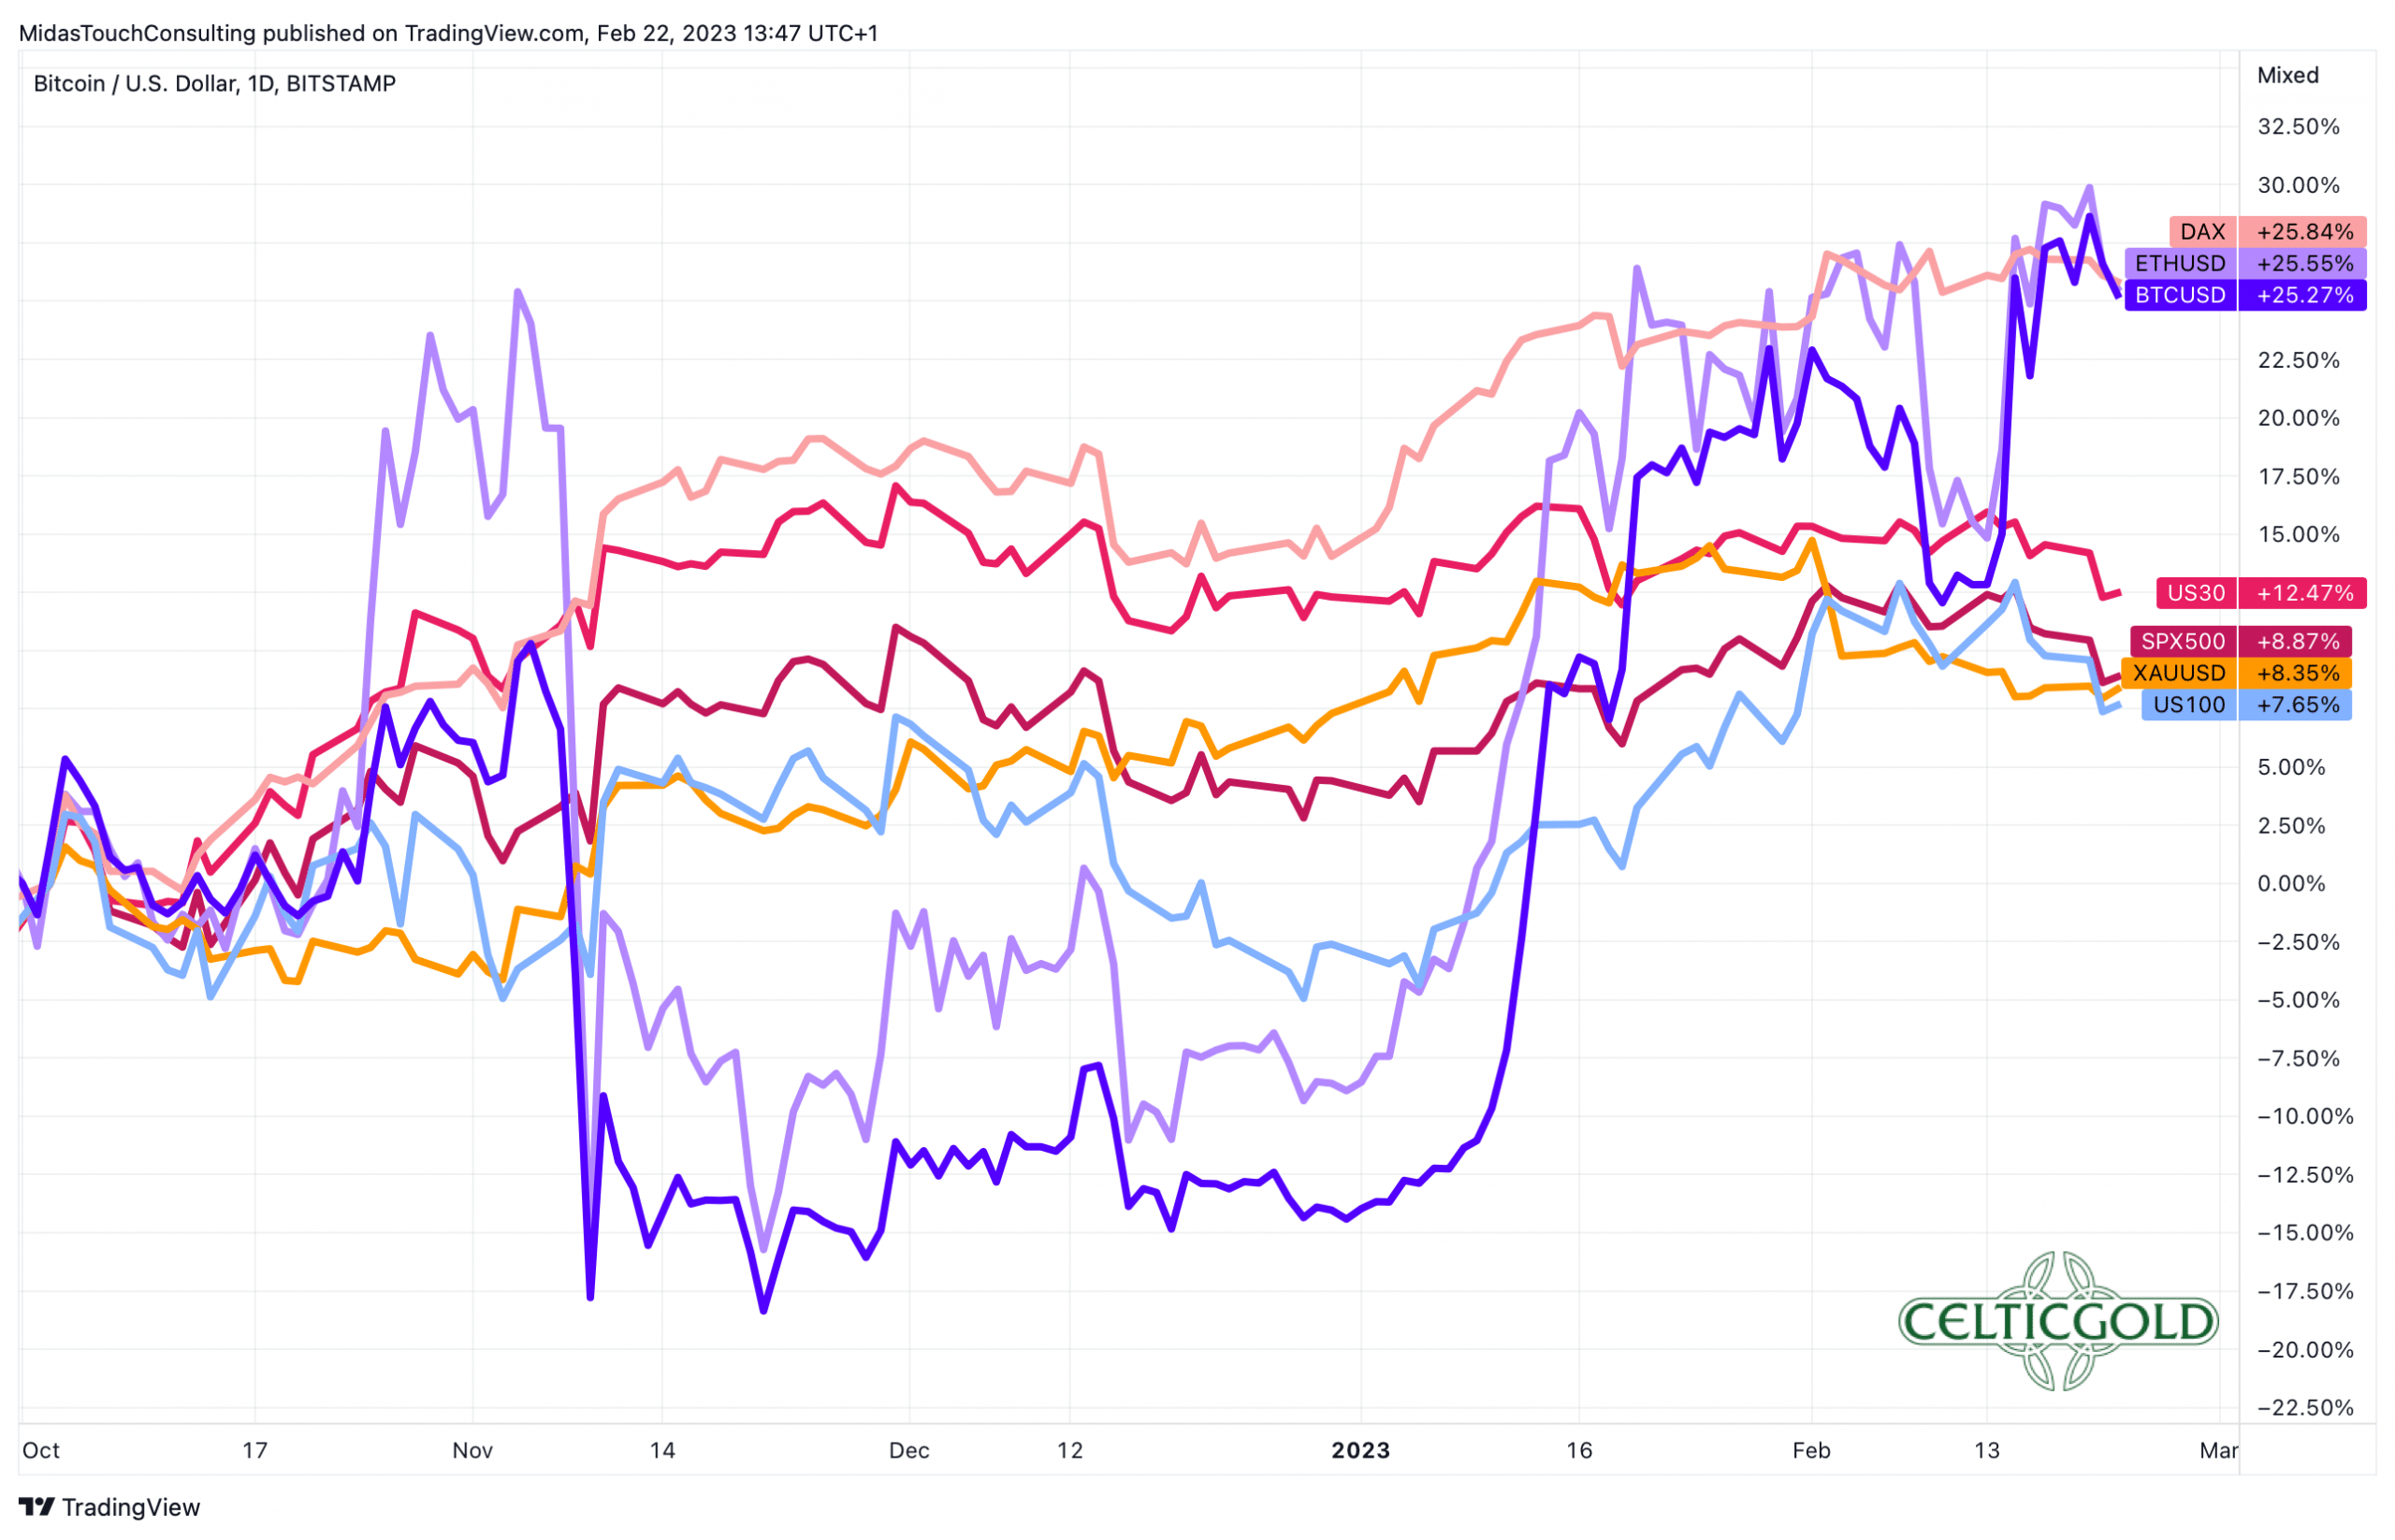 Performance Bitcoin vs. Ethereum vs. stocks vs. gold since 1st of October 2022, as of February 23rd, 2023. Source: Tradingview. February 23rd, 2023, Bitcoin - Next target 30,000 USD.